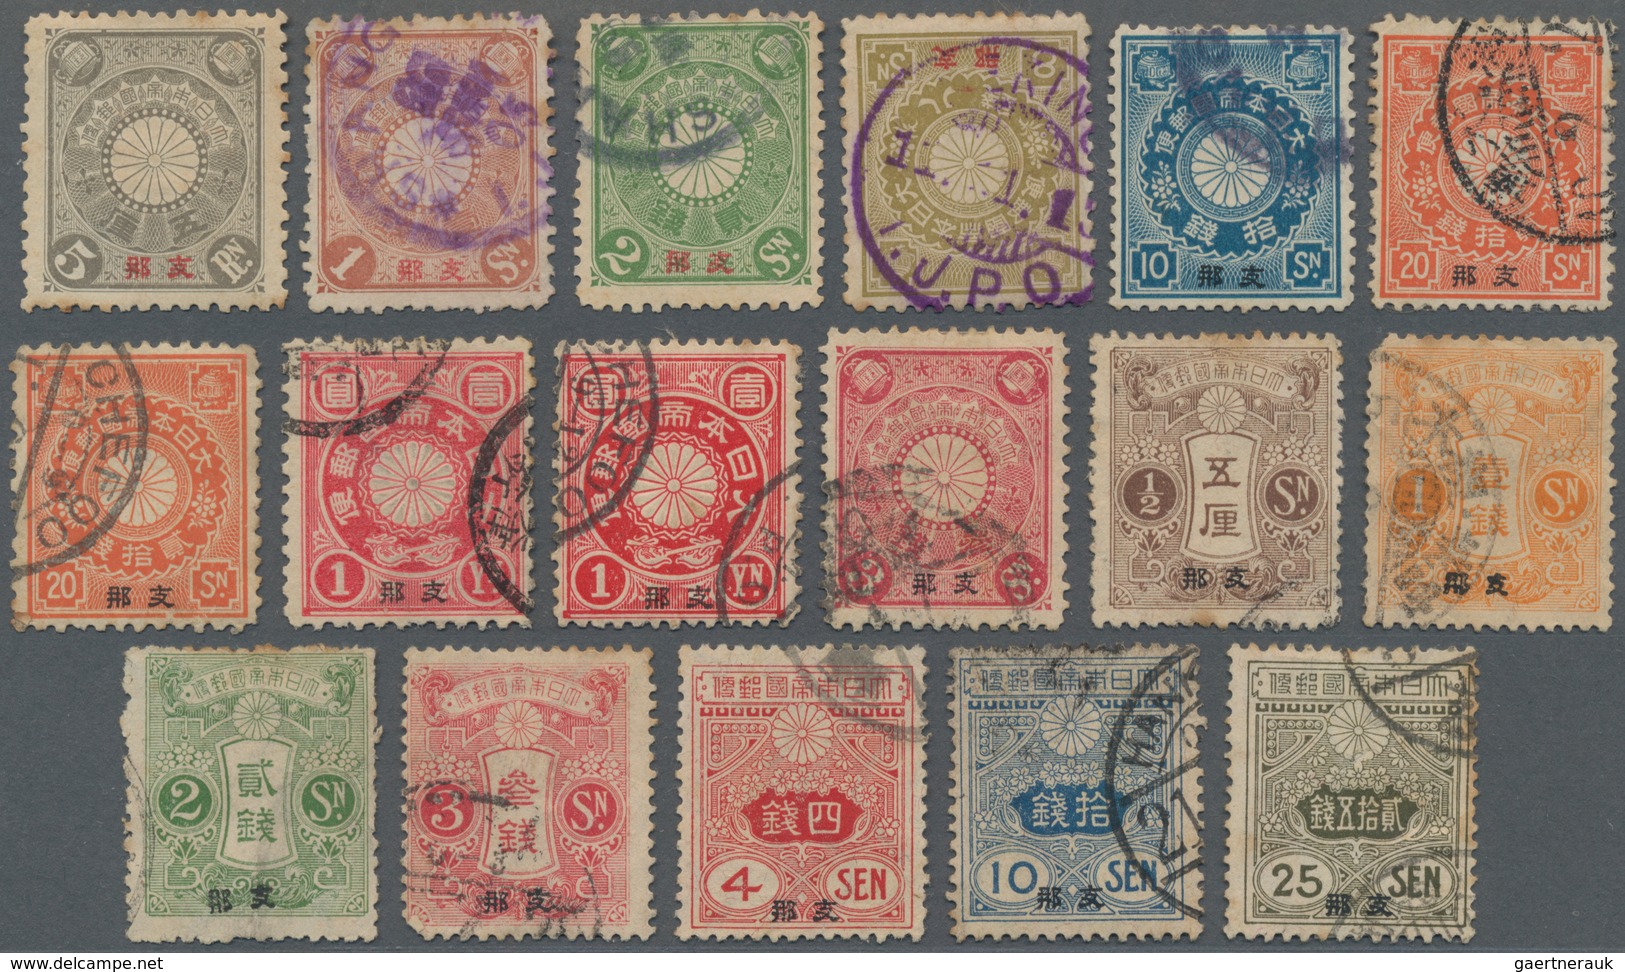 Japanische Post in China: 1900/06, four-colour frank 1/2 s., 1 1/2 S., 3 S. red and 5 S. tied metal